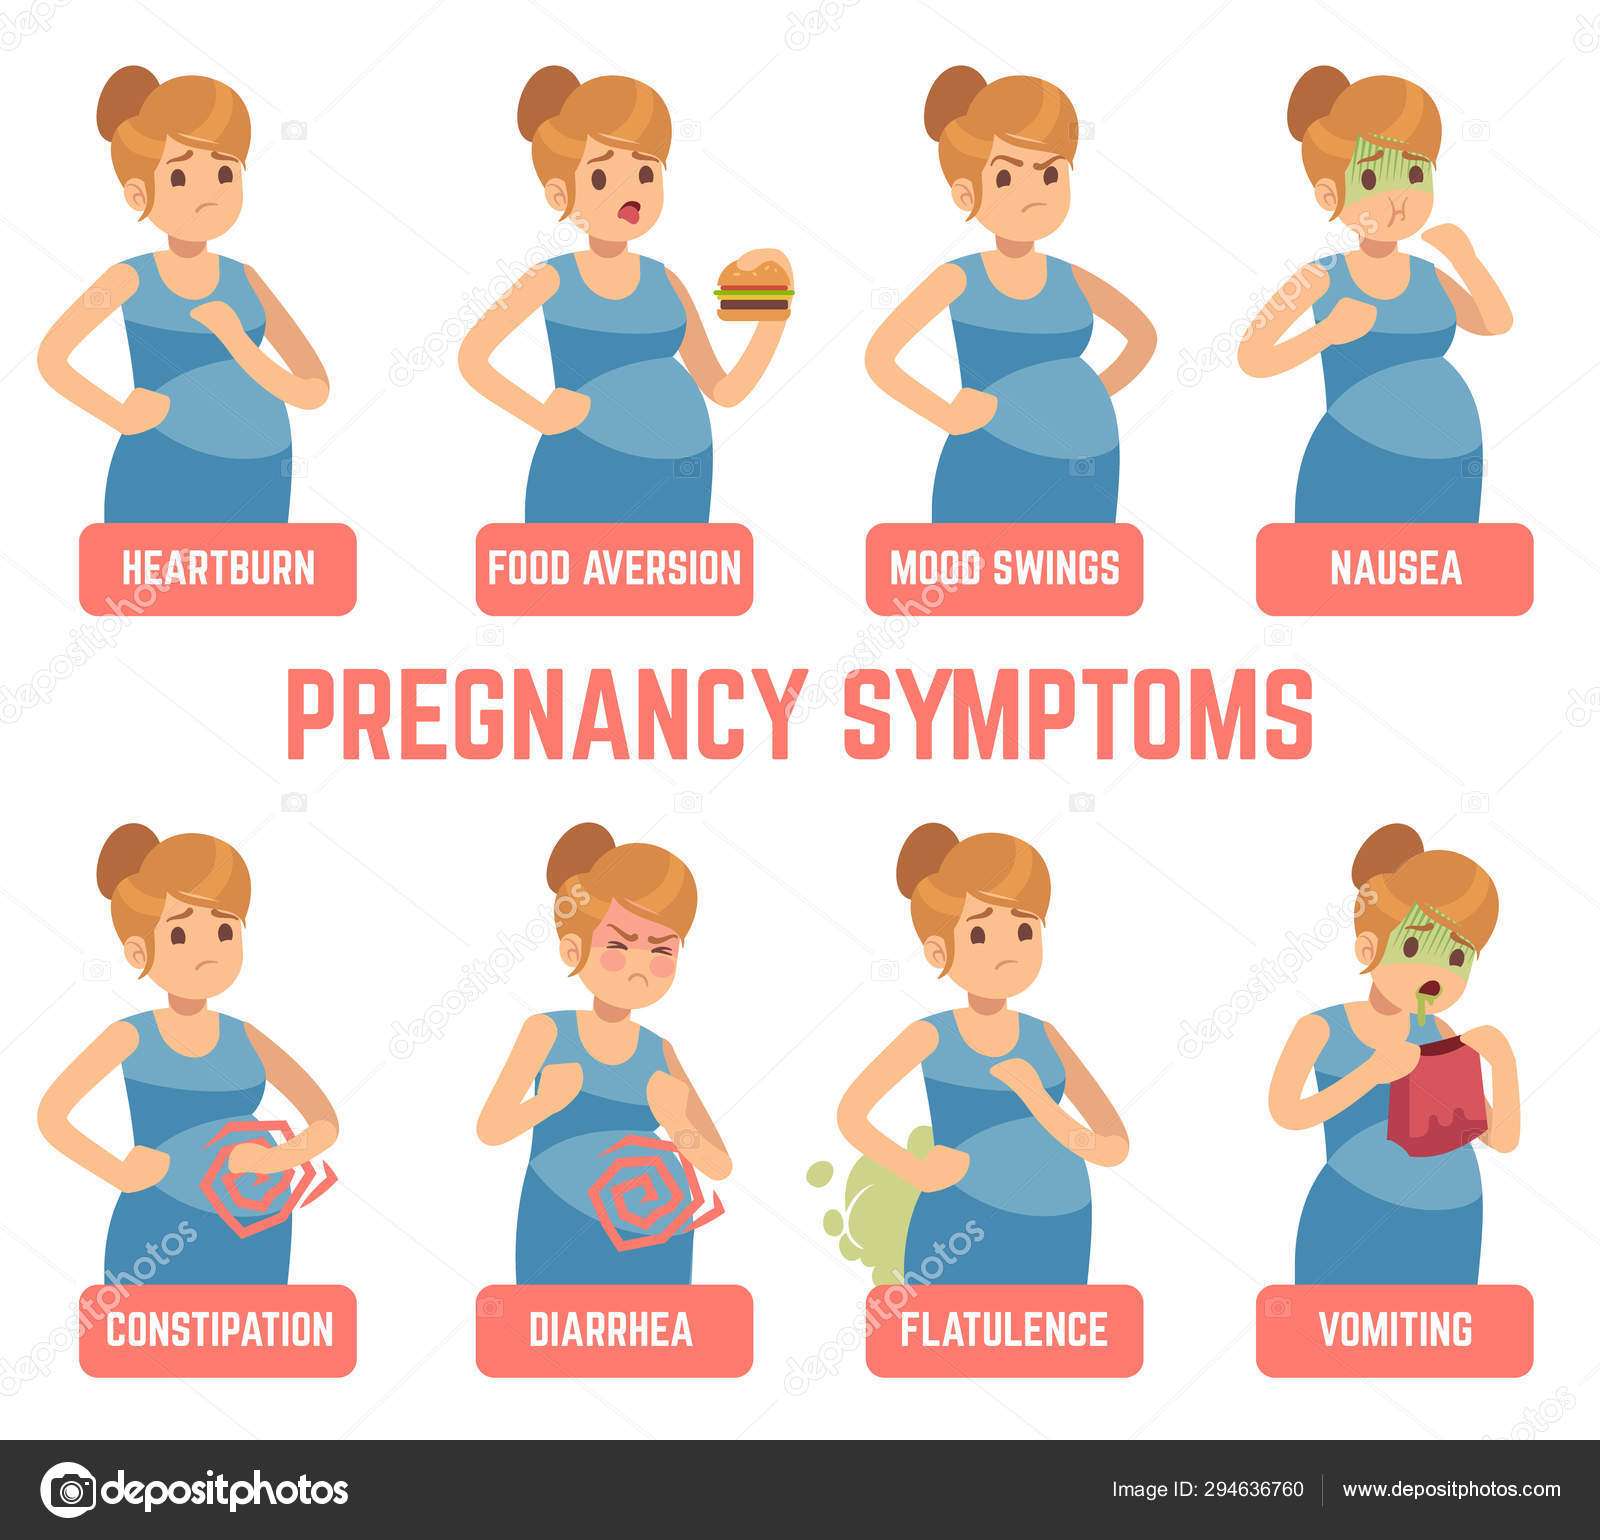 Gas And Heartburn Early Signs Of Pregnancy